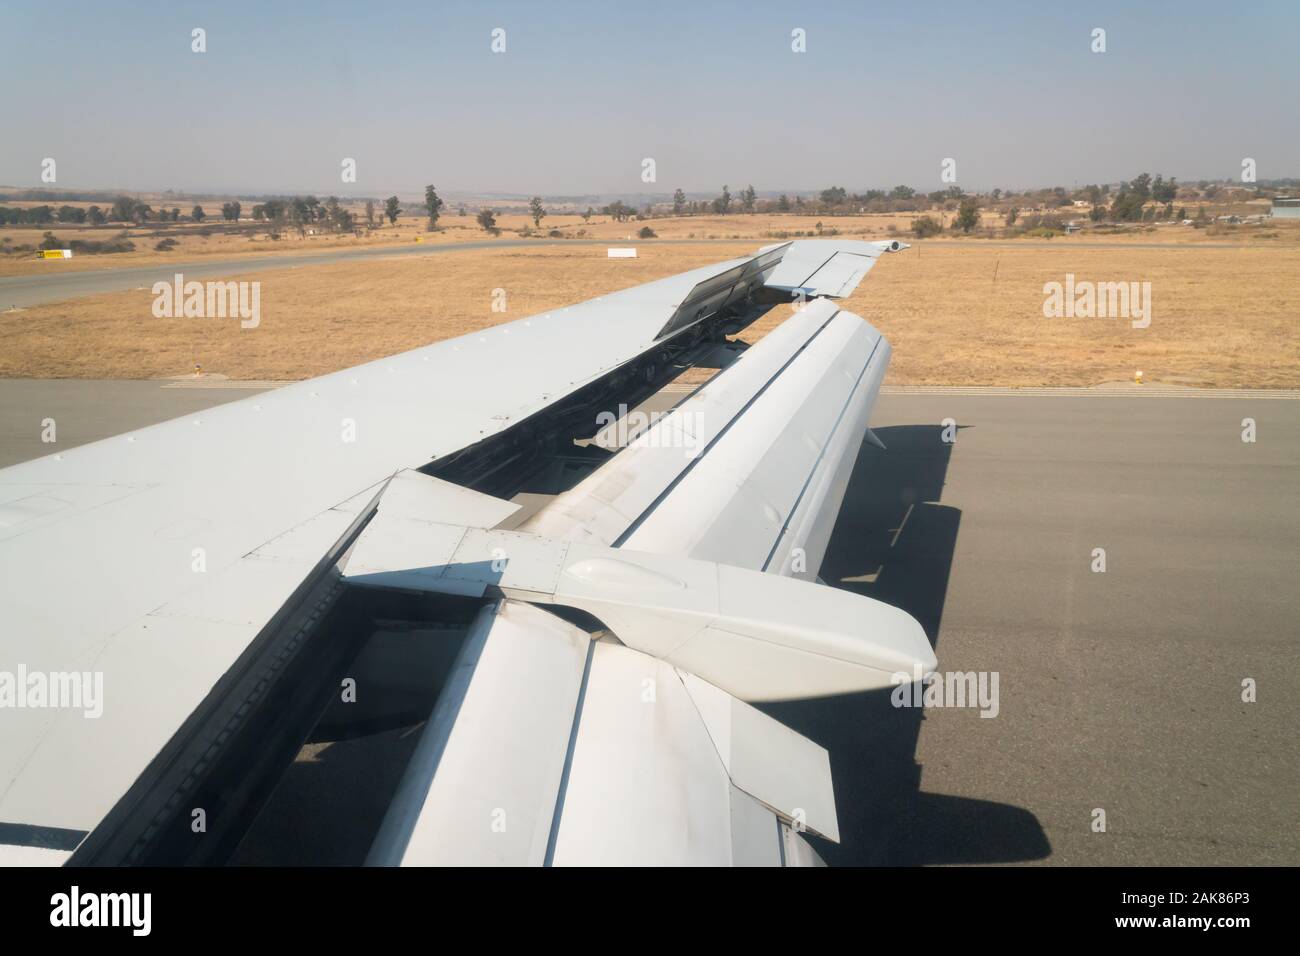 view of the open flaps, aileron and spoiler on a plane wing as it lands on a runway in Lanseria South Africa Stock Photo